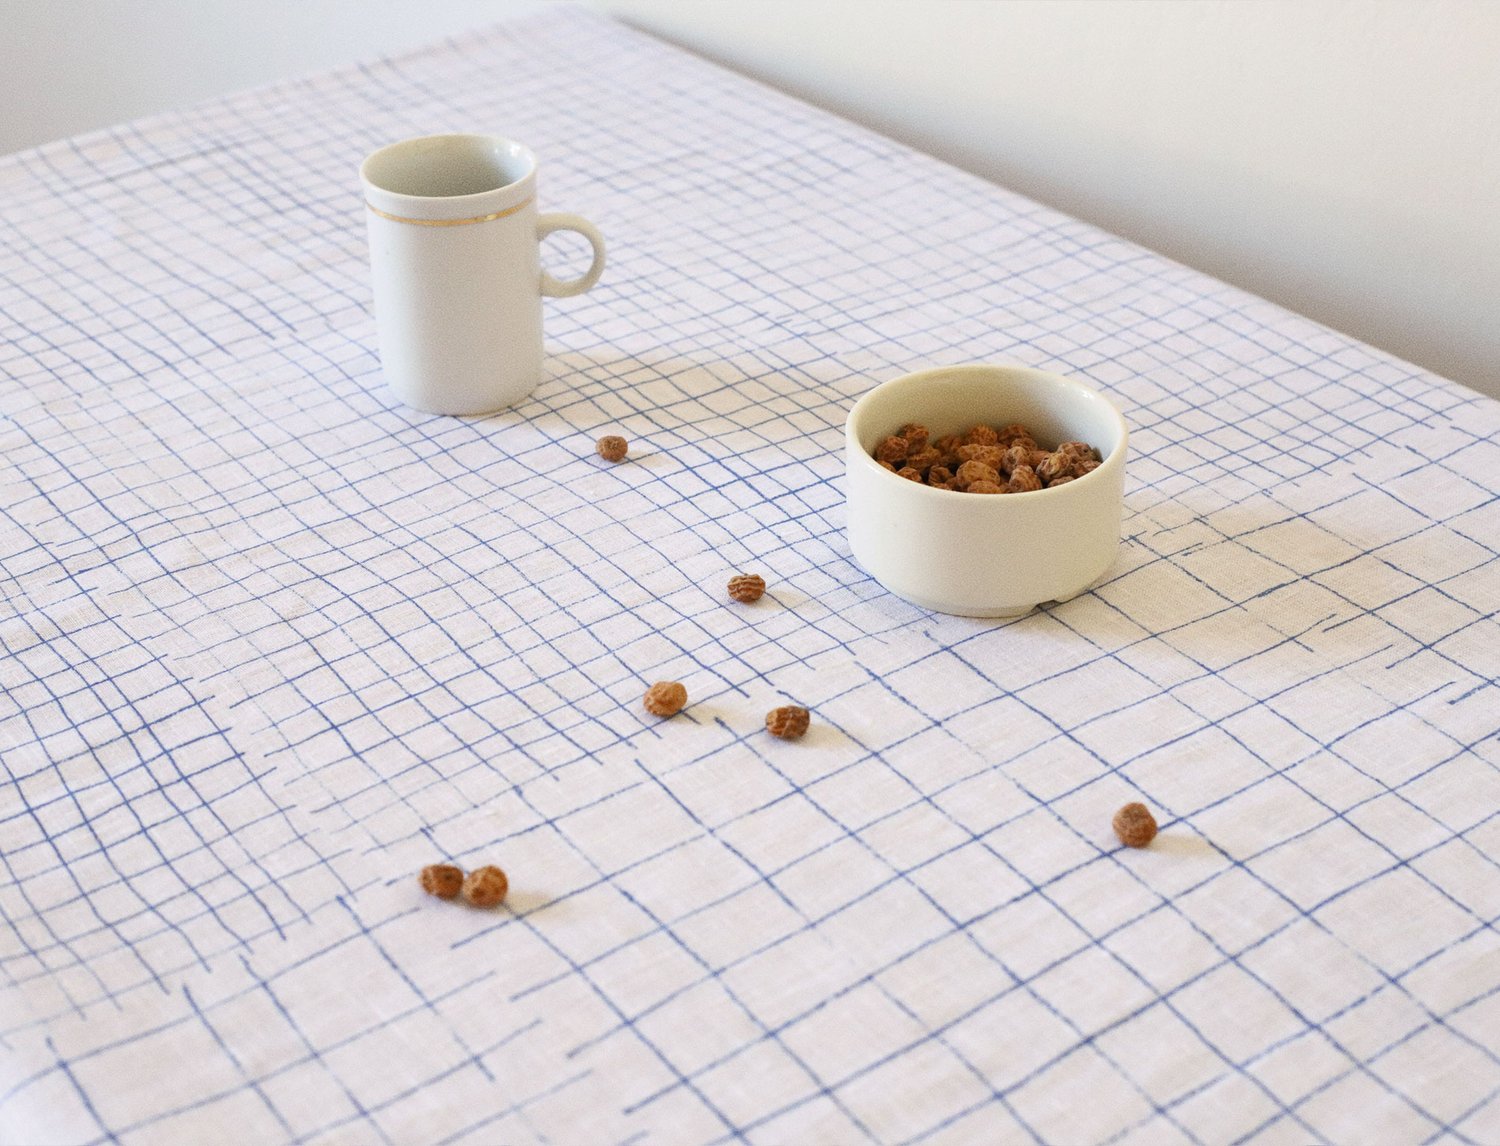 Image of BLUE GRID TABLE CLOTH / ✱